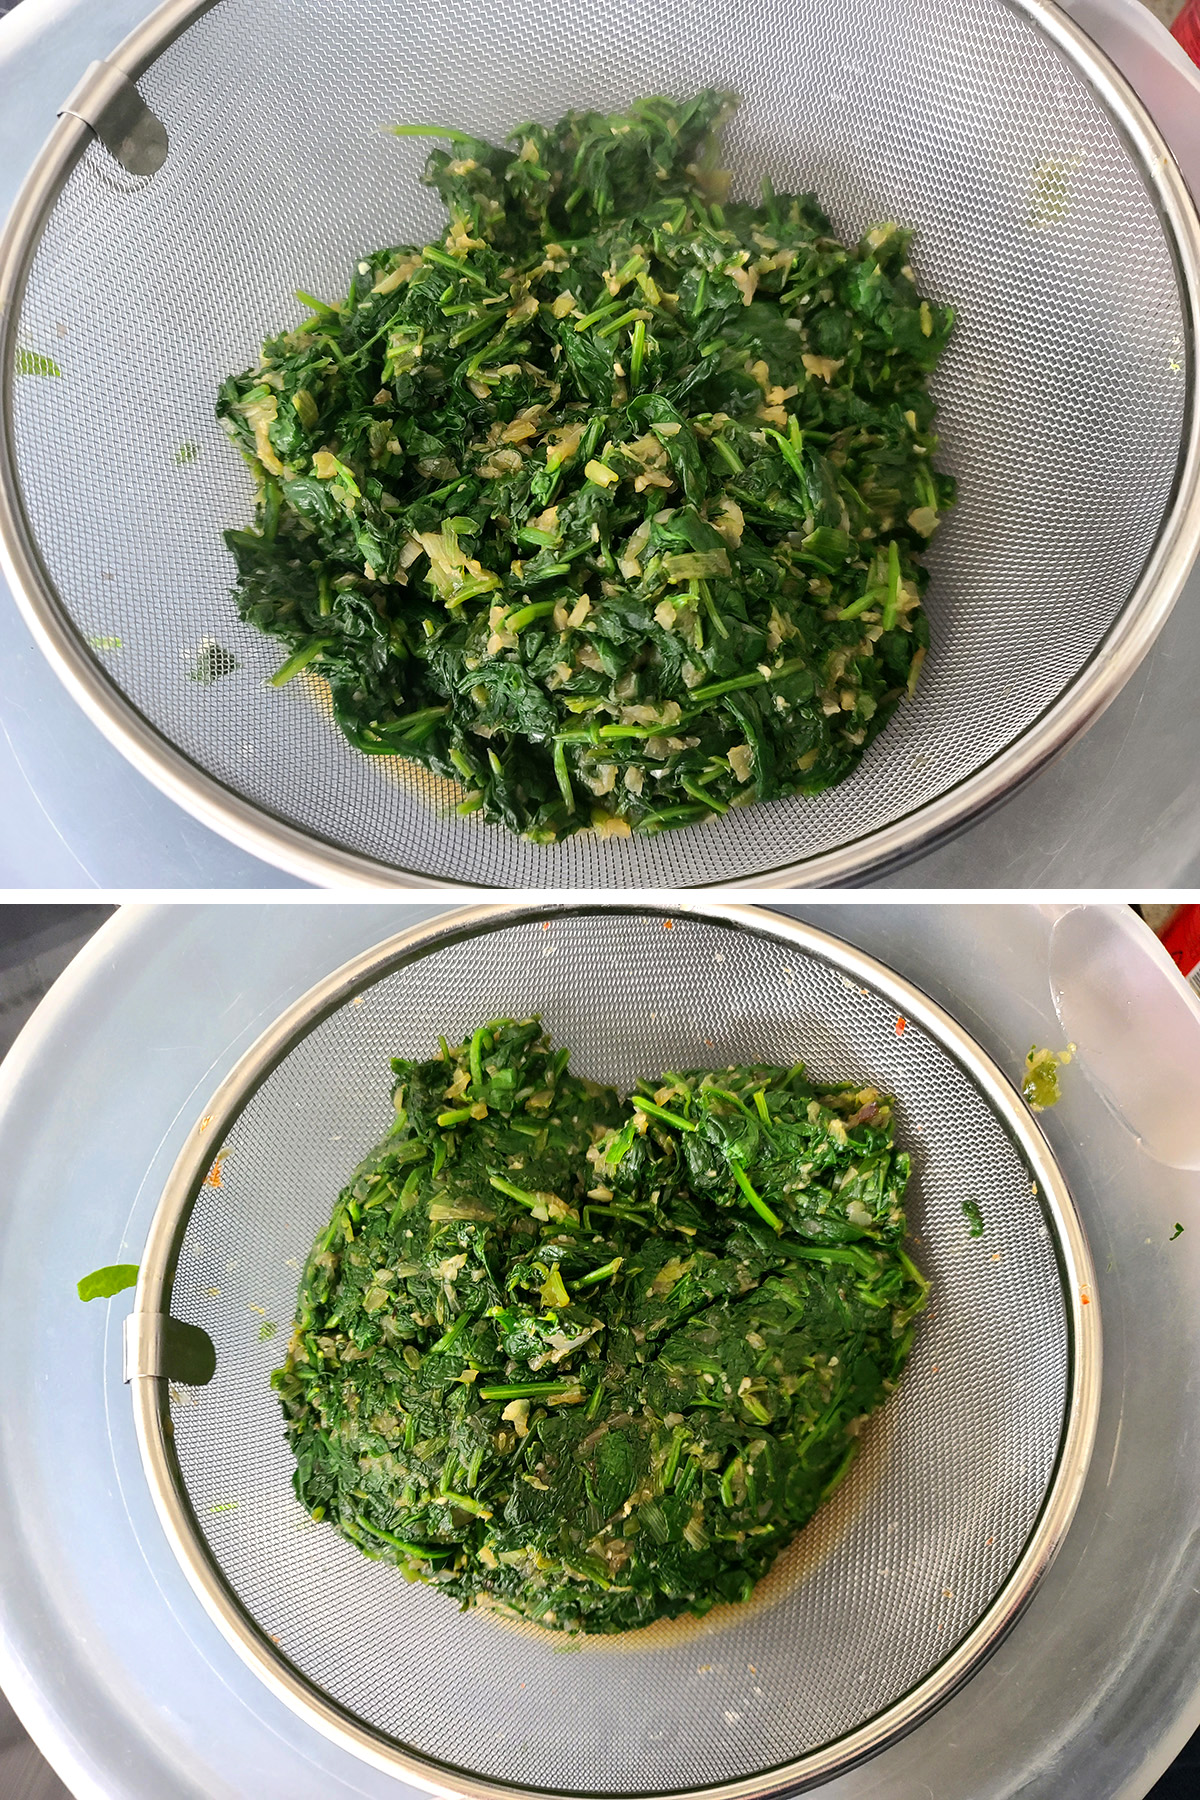 A two part image showing the spinach mixture draining in a metal sieve, before and after excess liquid has been squeezed out.